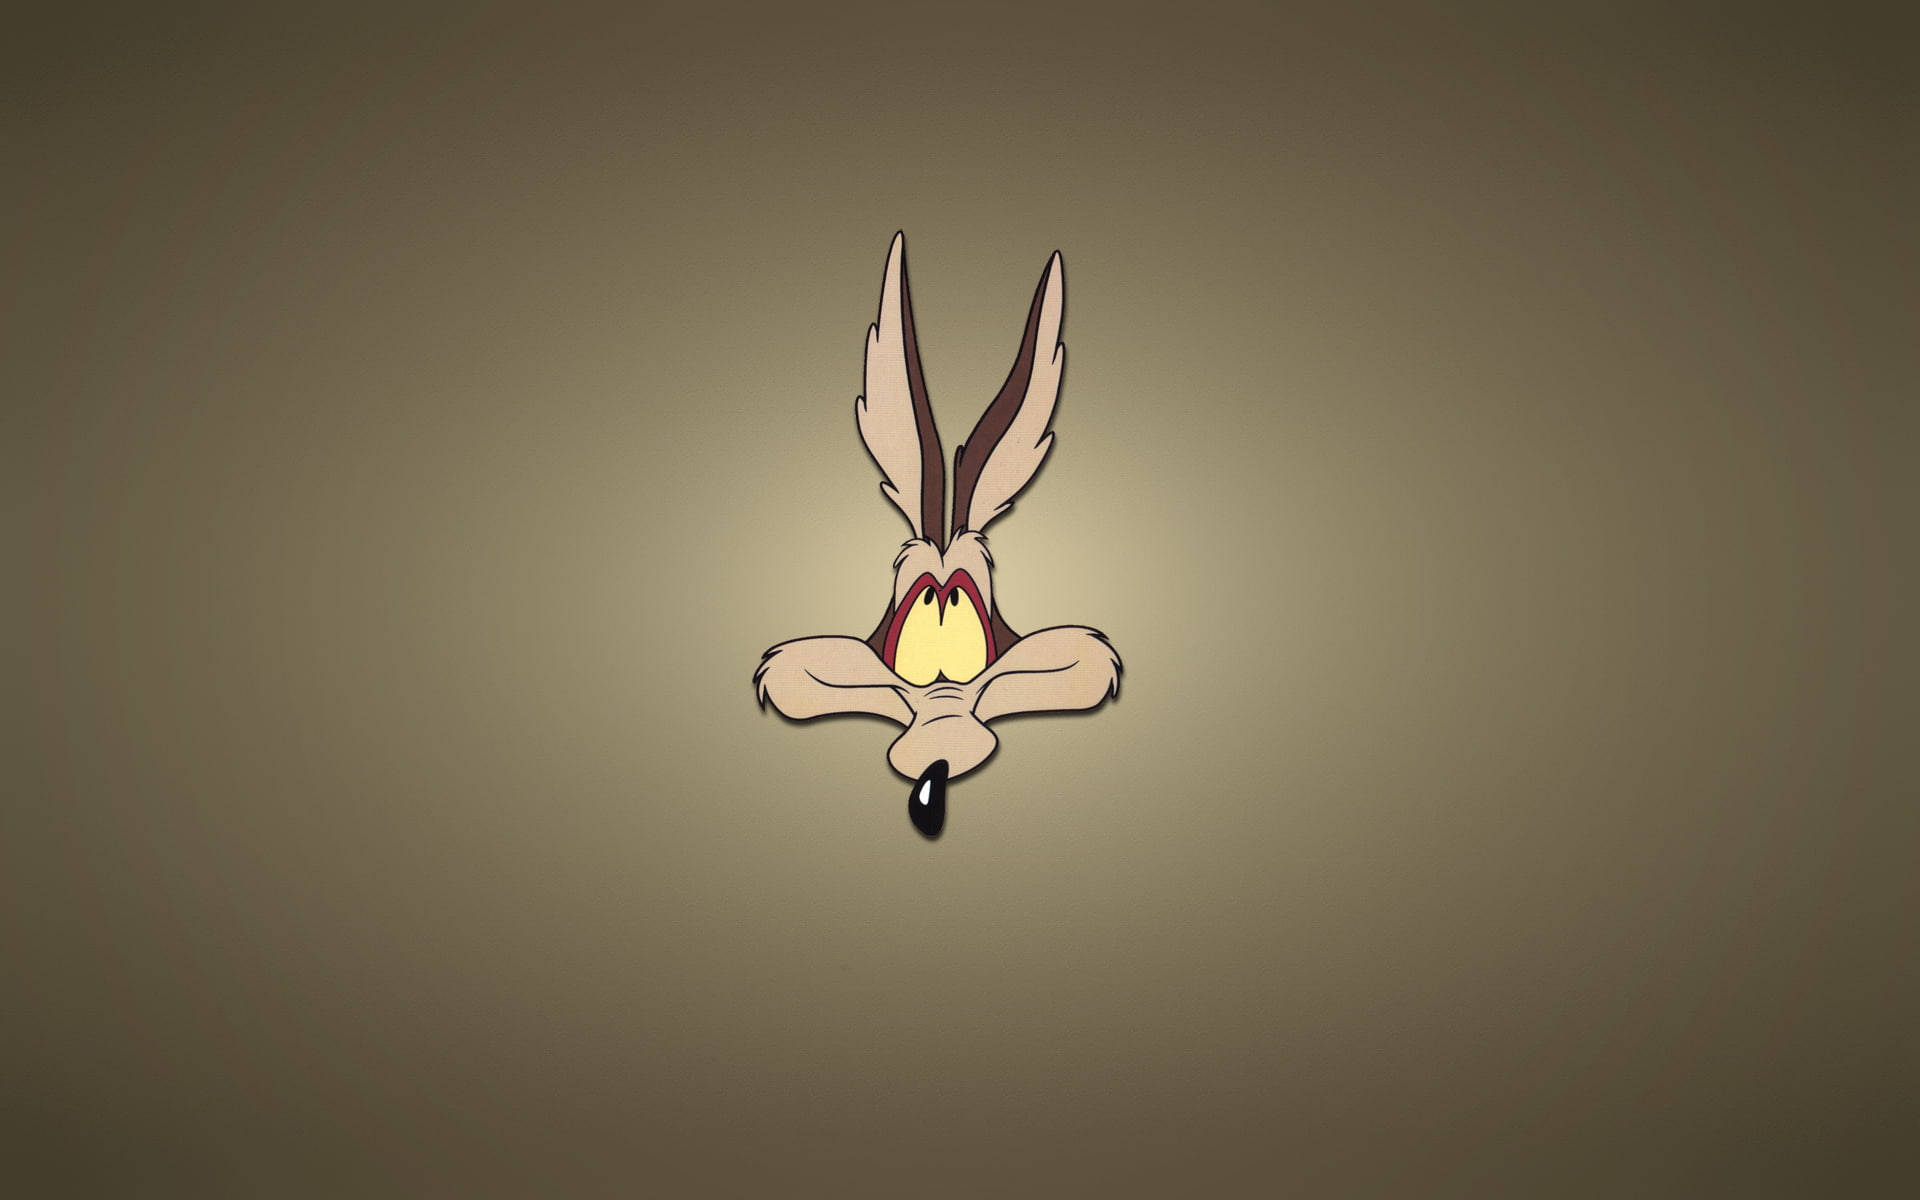 Looney Tunes Wile E. Coyote Background